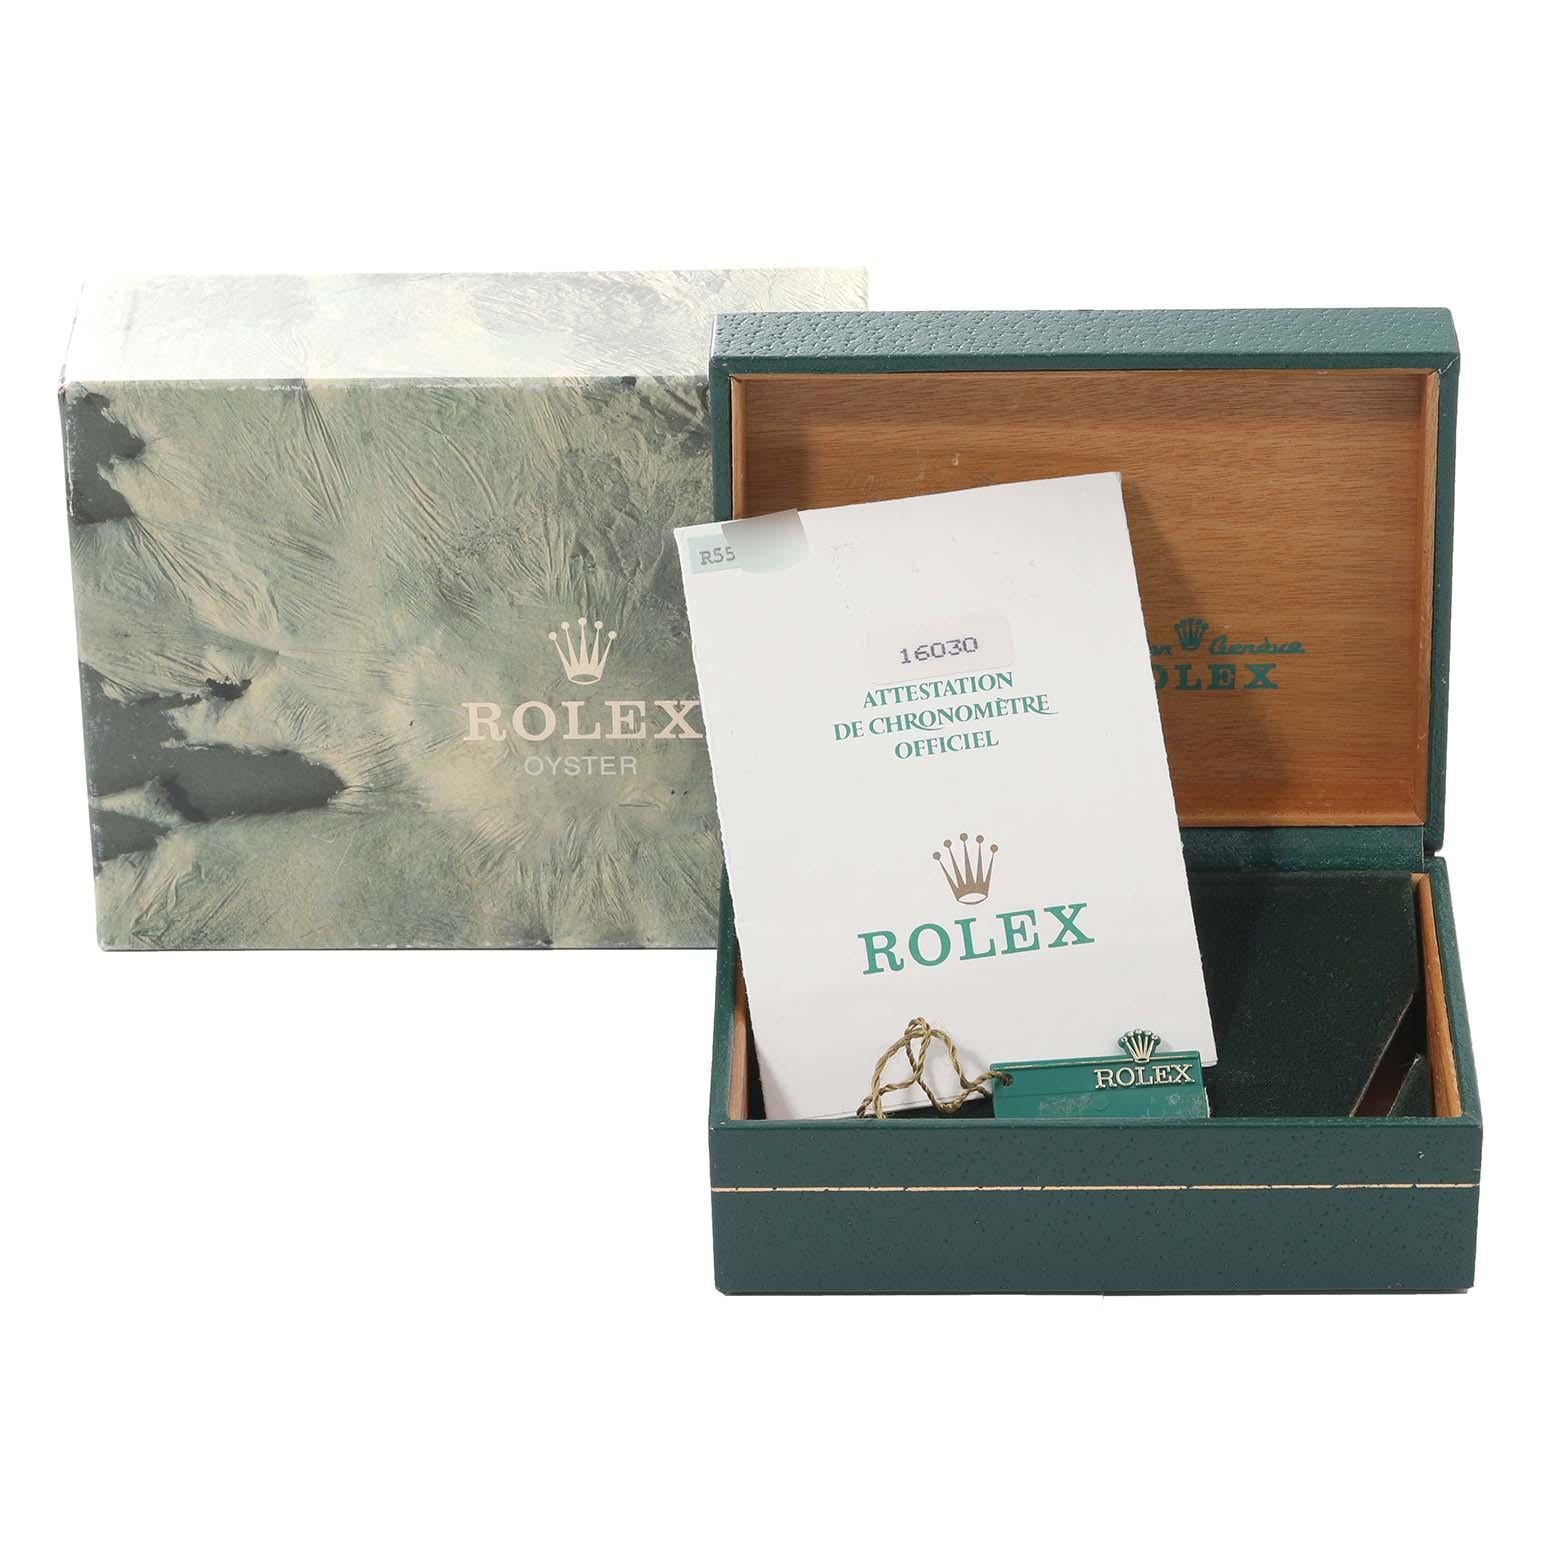 Rolex Datejust Engine Turned Bezel Vintage Steel Mens Watch 16030 Box Papers For Sale 6